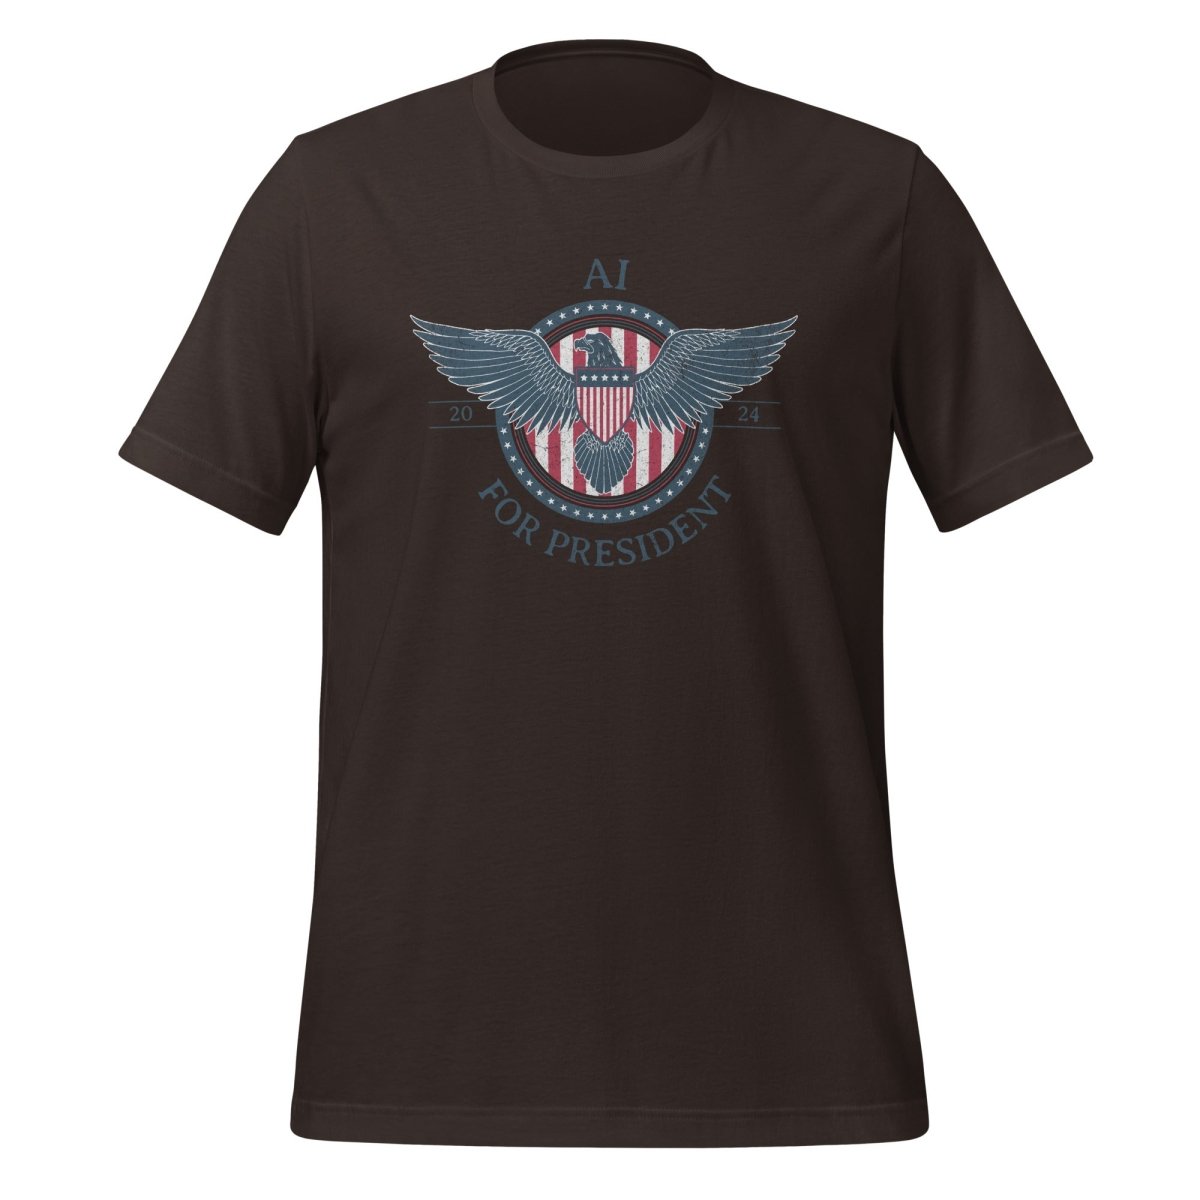 AI for President 2024 T - Shirt (unisex) - Brown - AI Store